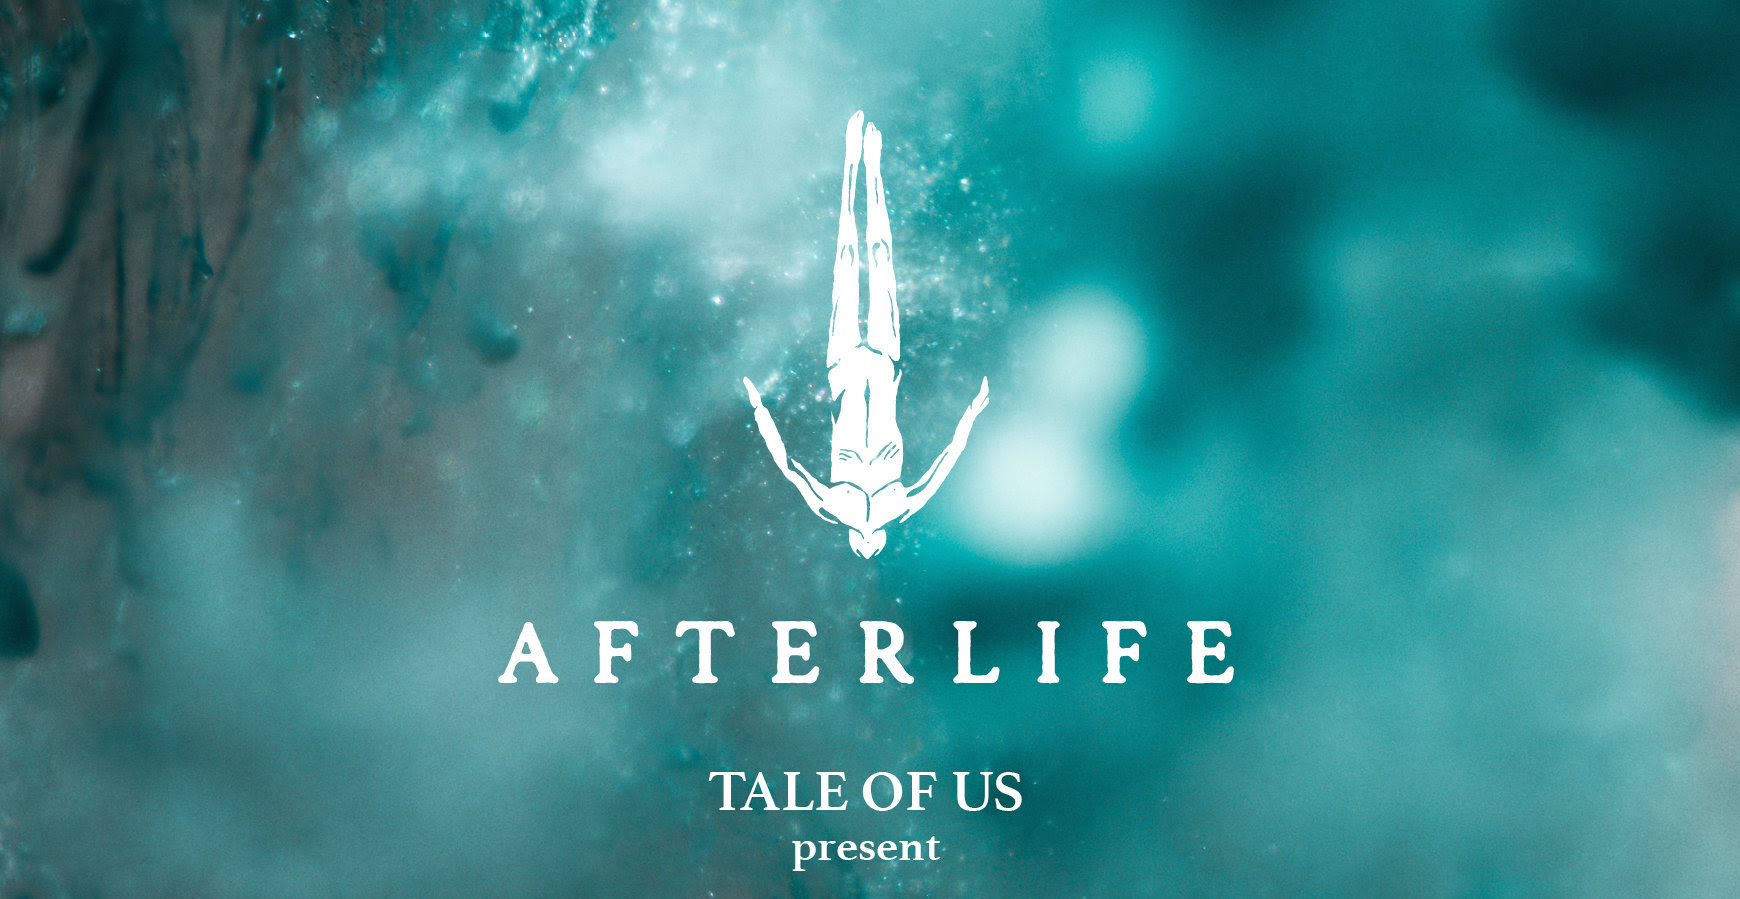 Tale of Us' Afterlife Is Sound Tulum's First Confirmation - Zamna